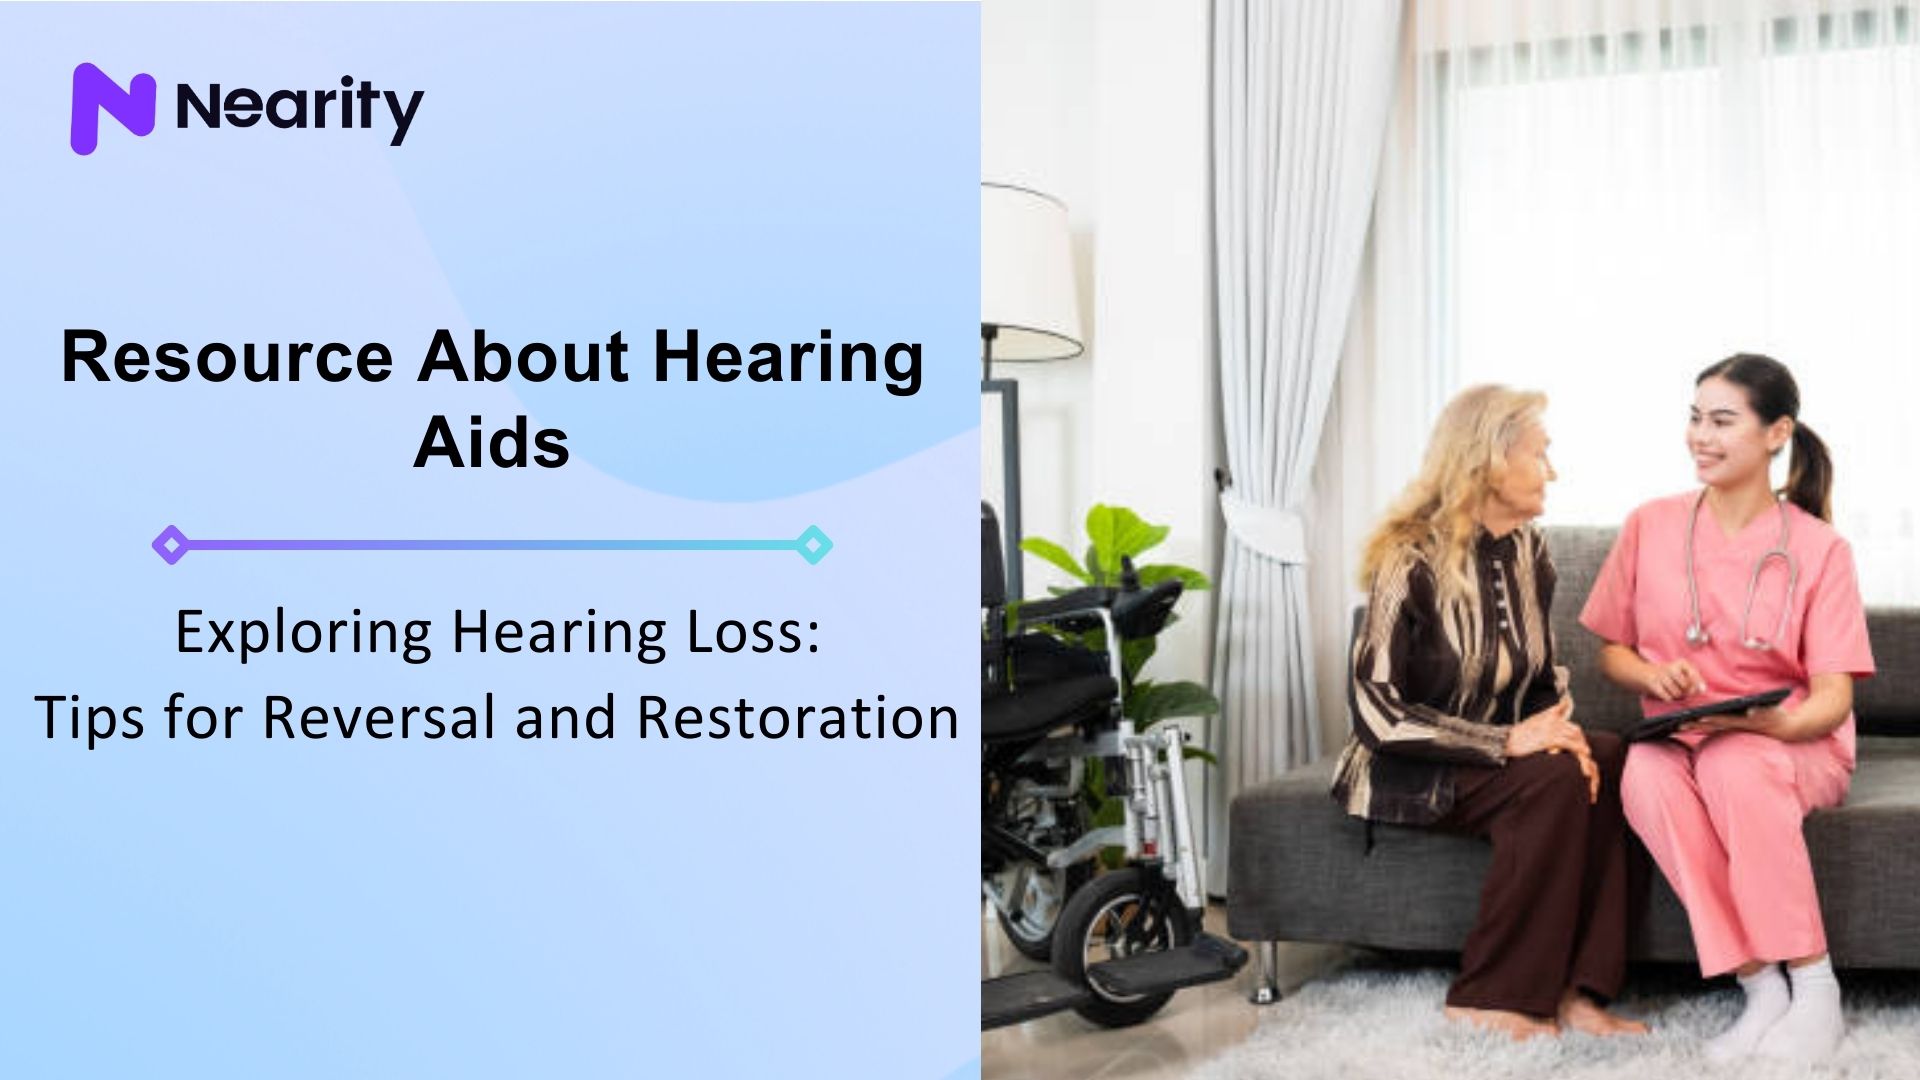 Exploring Hearing Loss: Tips for Reversal and Restoration